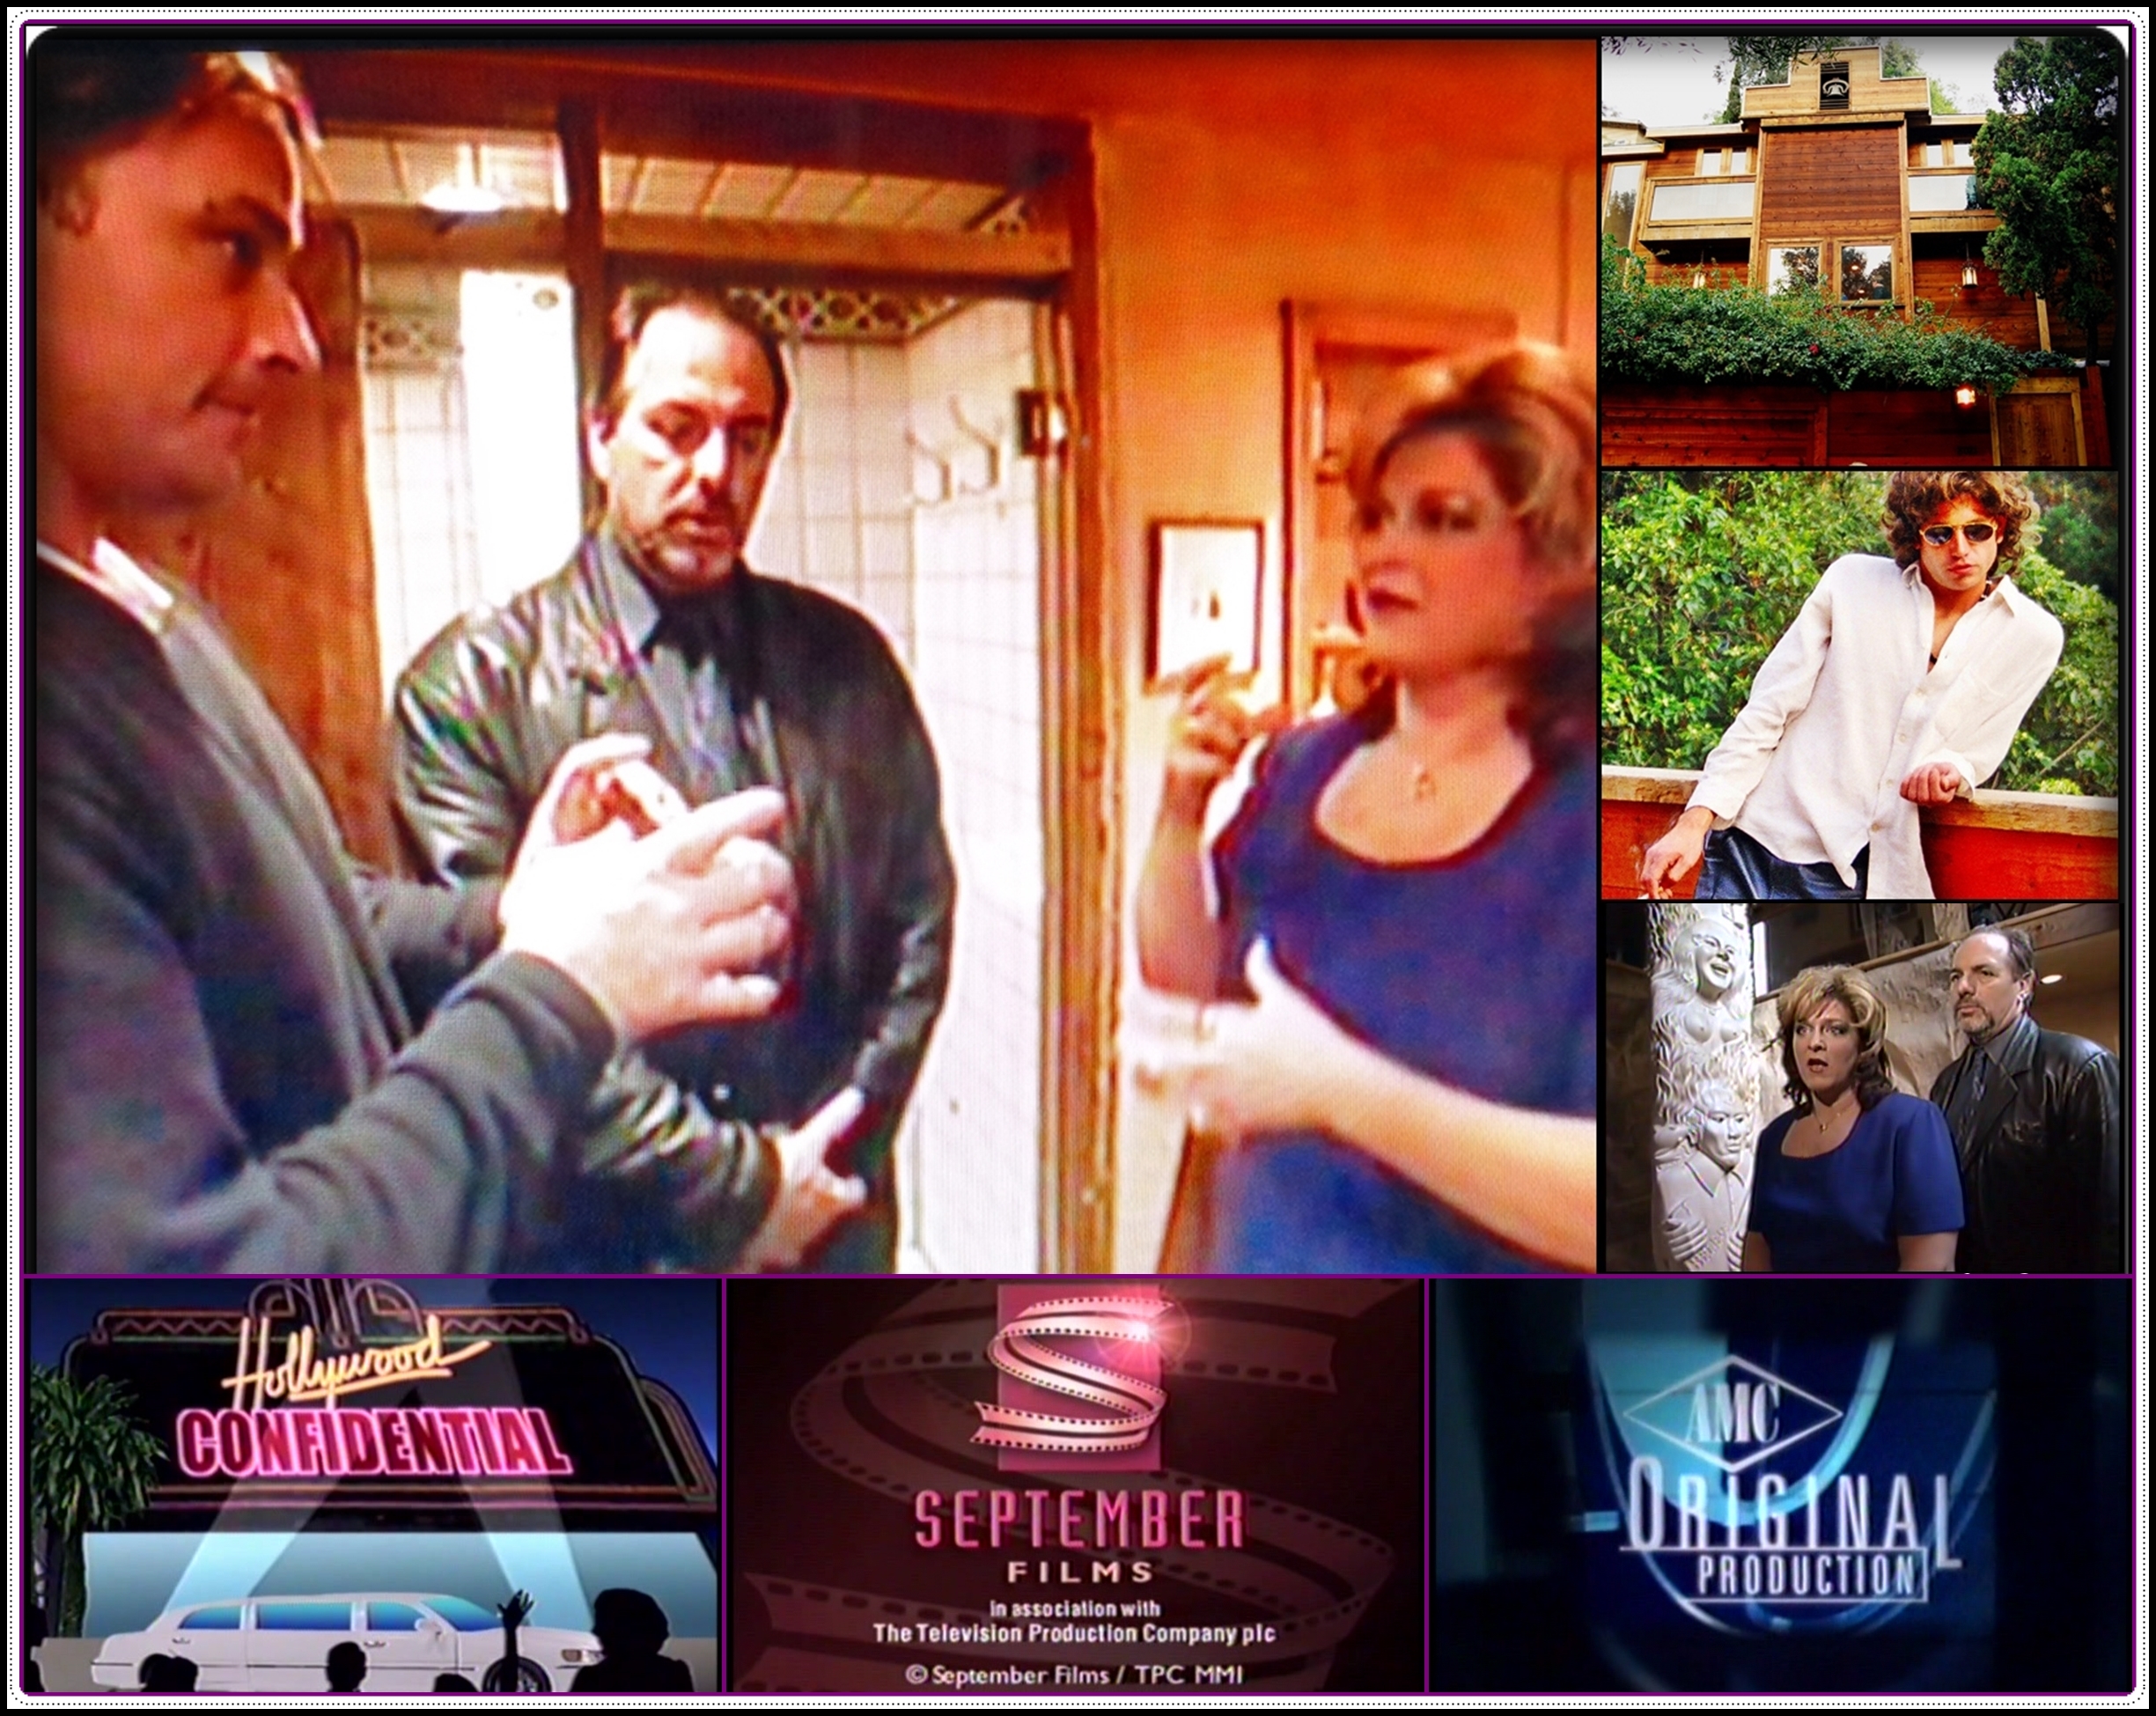 ISPR's Dr. Larry Montz and Abigail with Ben Lucas, HOLLYWOOD CONFIDENTIAL (AMC, Discovery, ITV)at the former home of Jim Morrison (THE DOORS). (2001) First ISPR investigation of Ben / Jim Morrison's home was in 1997.